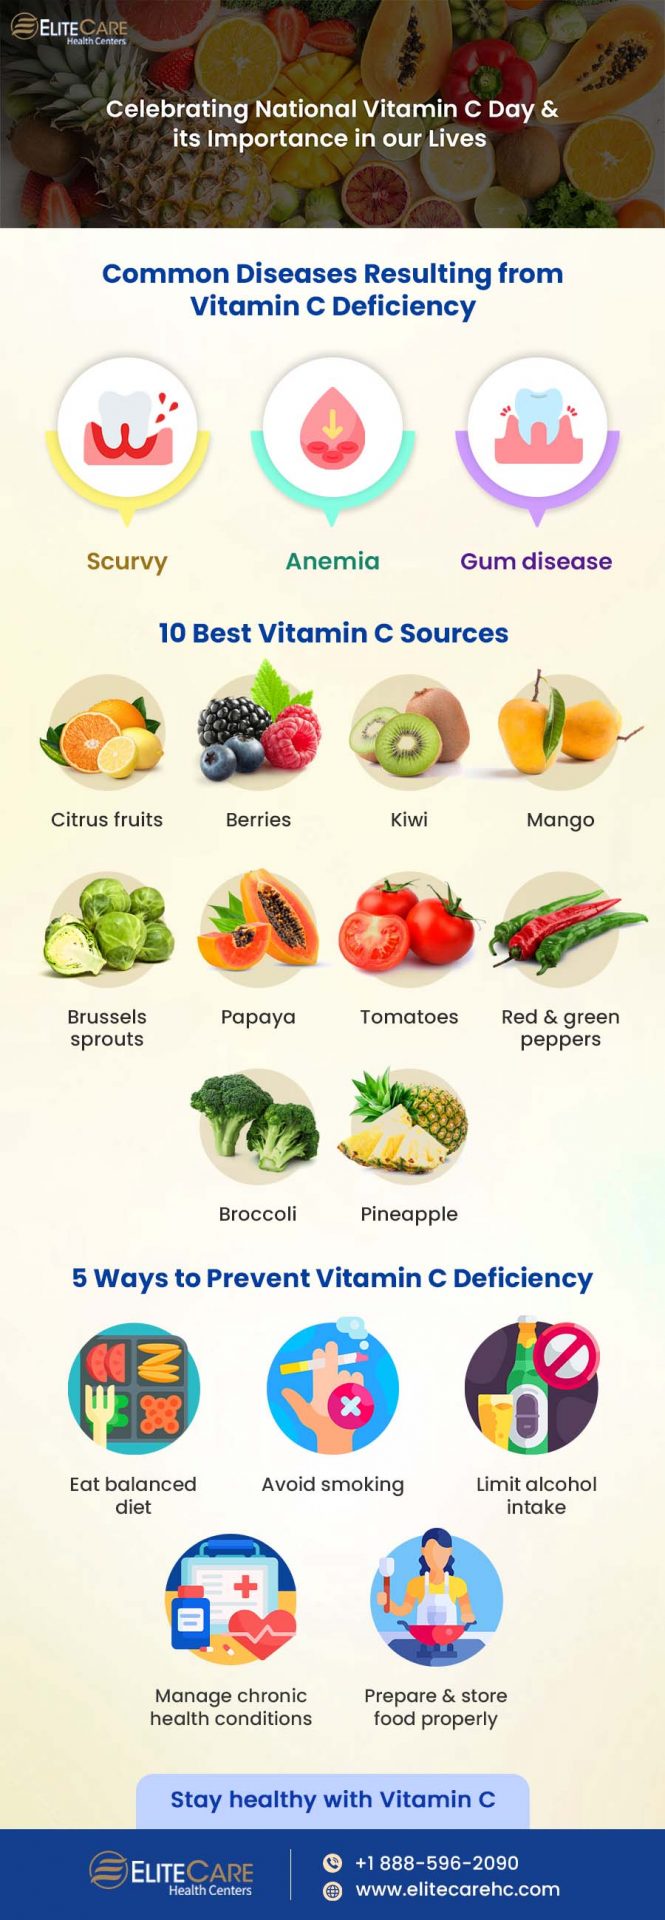 Celebrating National Vitamin C Day & its Importance in Our Lives | Infographic